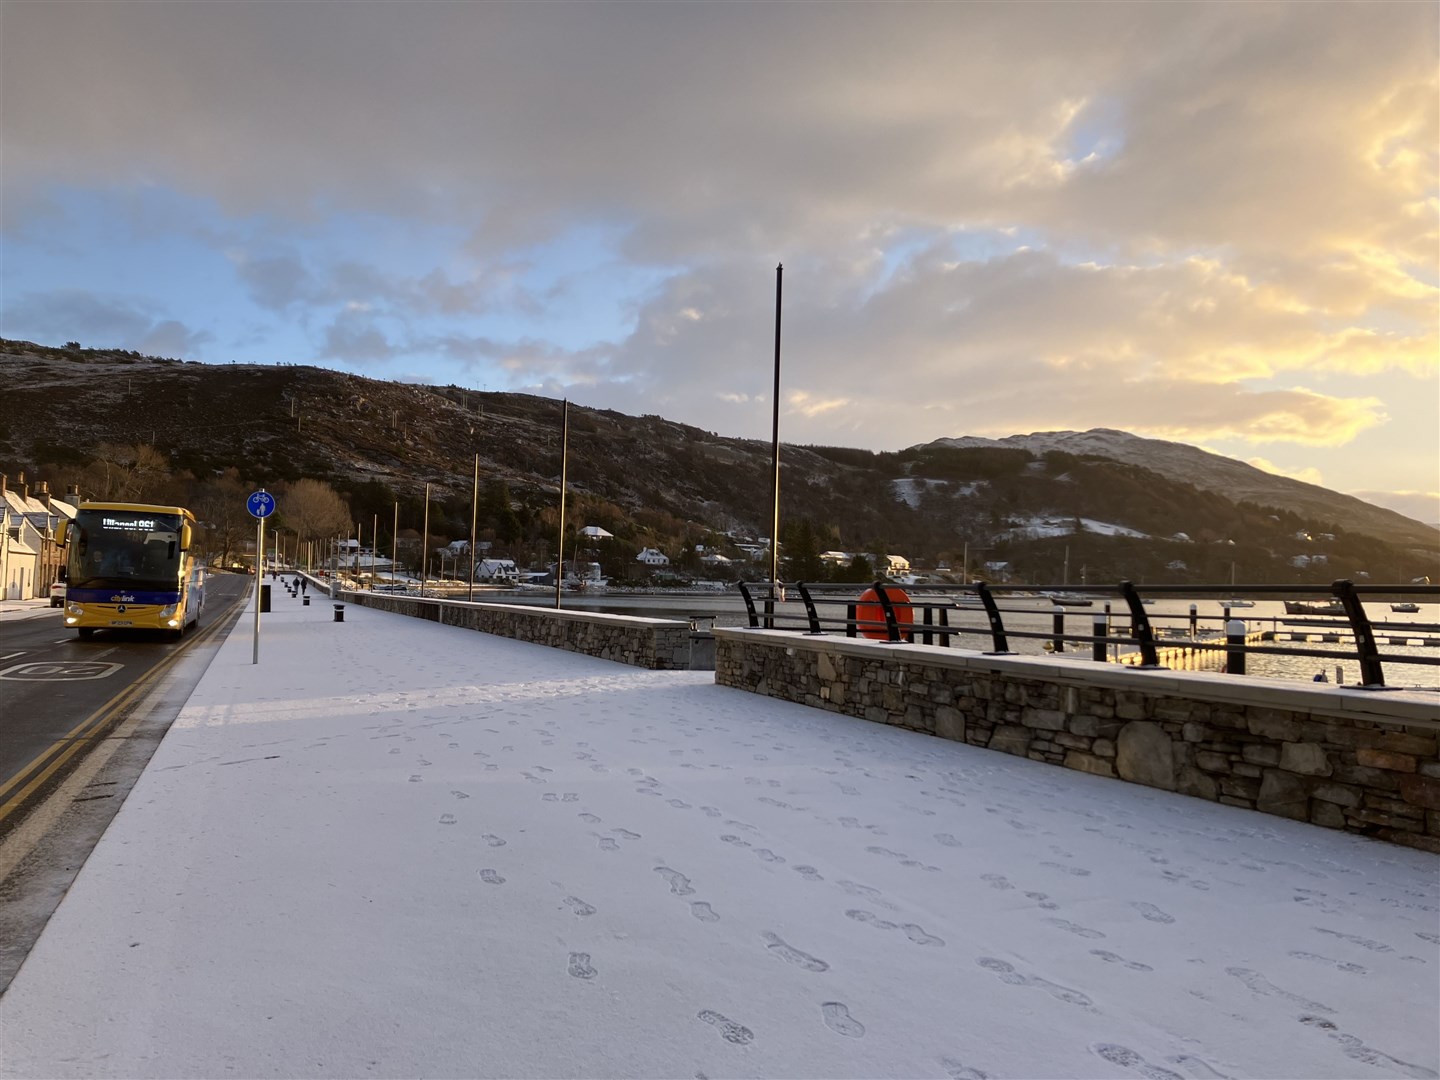 A snowy Ullapool this morning. In Wester Ross, schools closed due to the weather include Applecross, Gairloch High and Primary, Glenelg, Kyle, Loch Duich, Lochcarron, Plockton, Poolewe and Shieldaig. Picture: Iona MacDonald